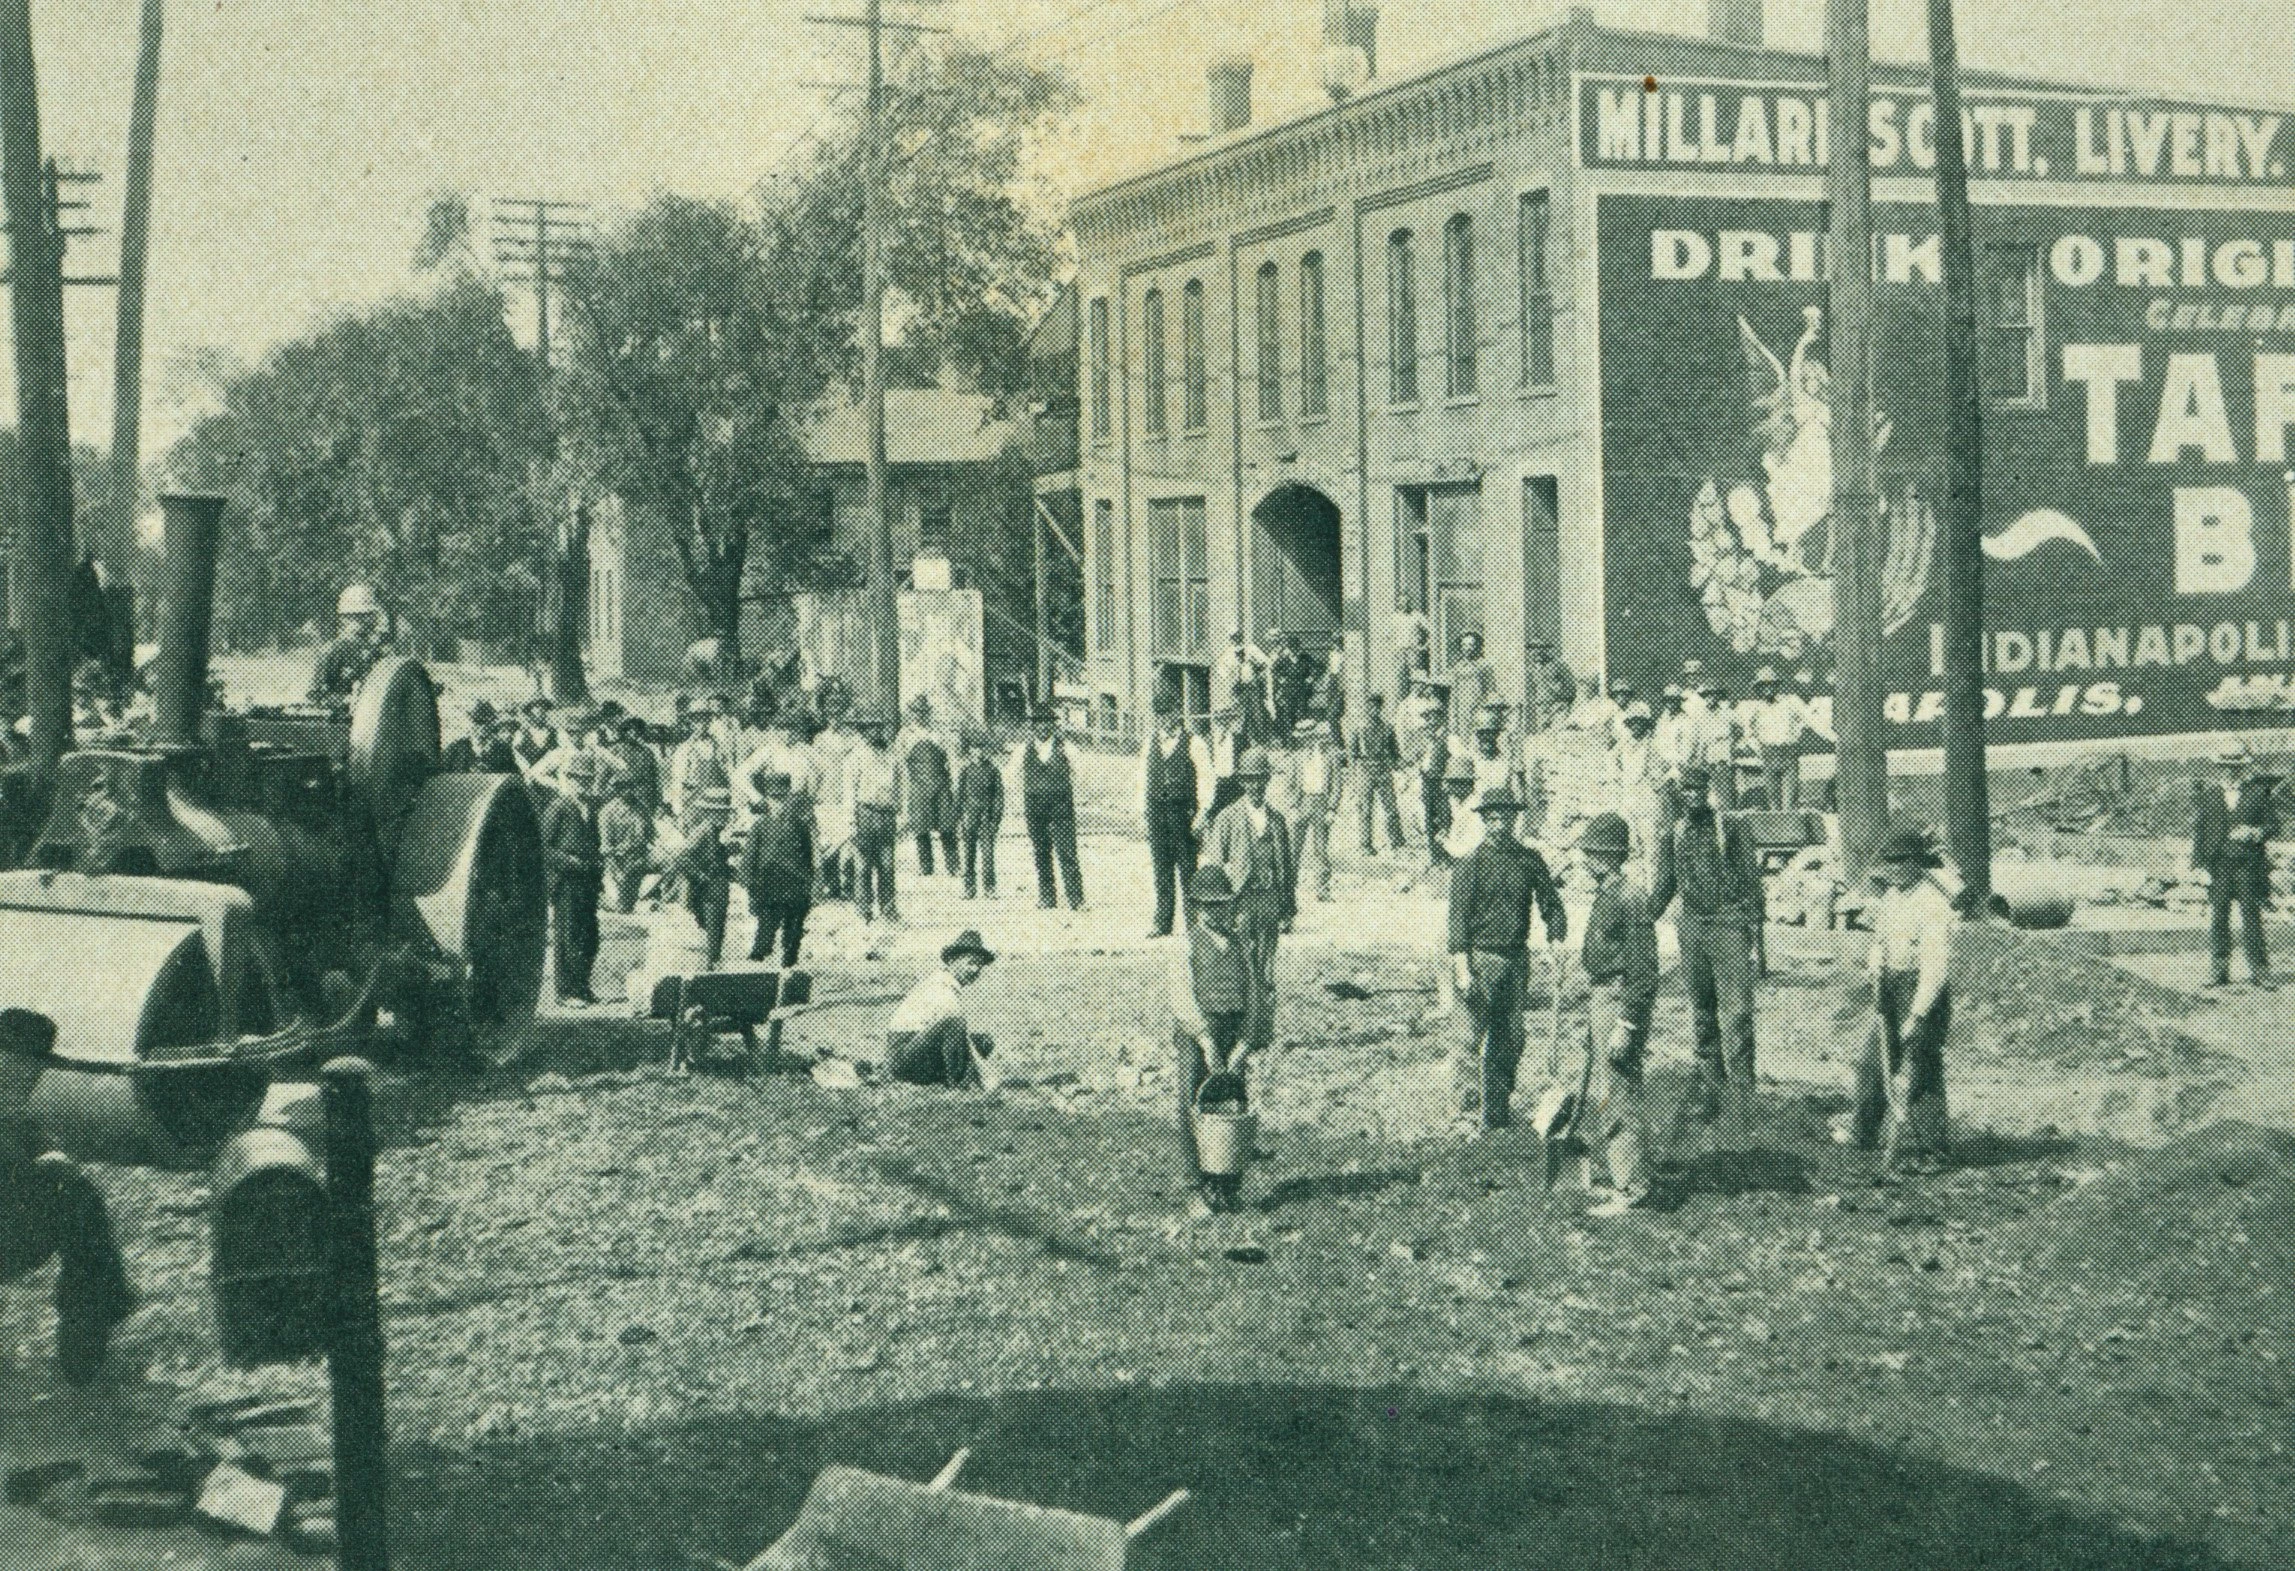 dozens of people are in this image, all standing looking towards the camera. Dirt is in the foreground, as well as a large steamroller. In the background is a two-story brick building, homes, trees, and utility poles. Many men are holding buckets and shovels.